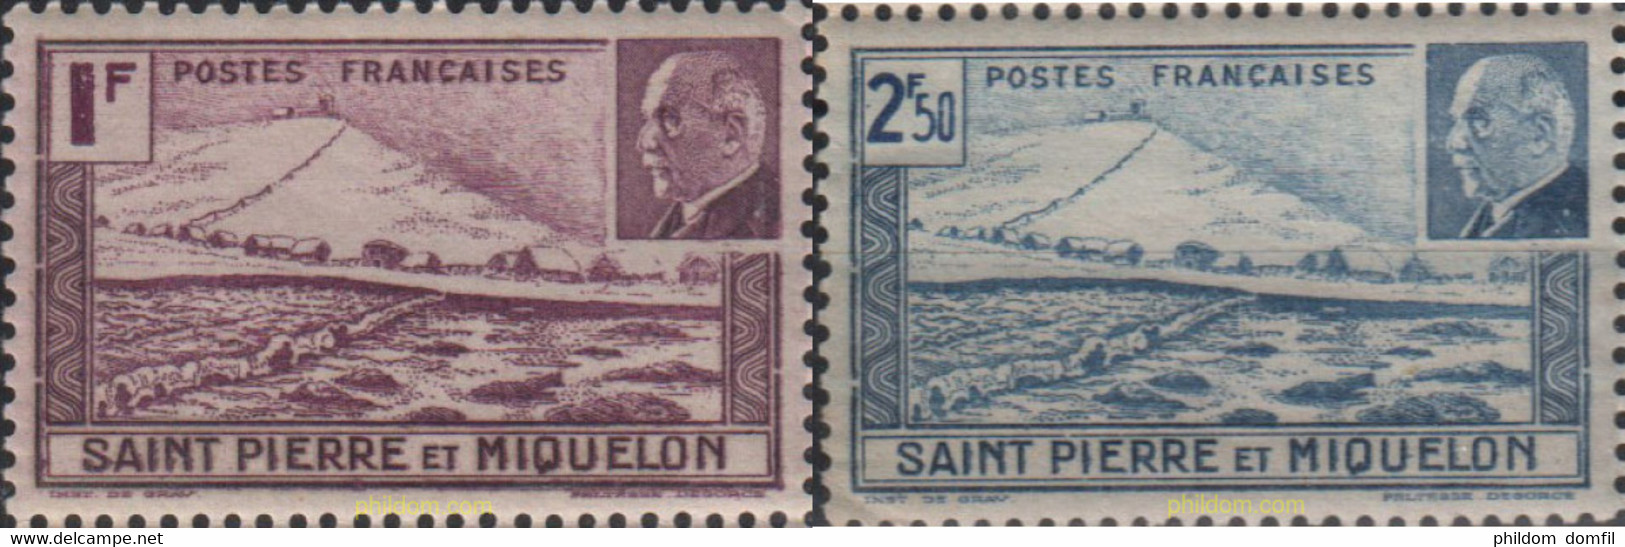 161125 MNH SAN PEDRO Y MIQUELON 1941 MARISCAL PETAIN - Used Stamps